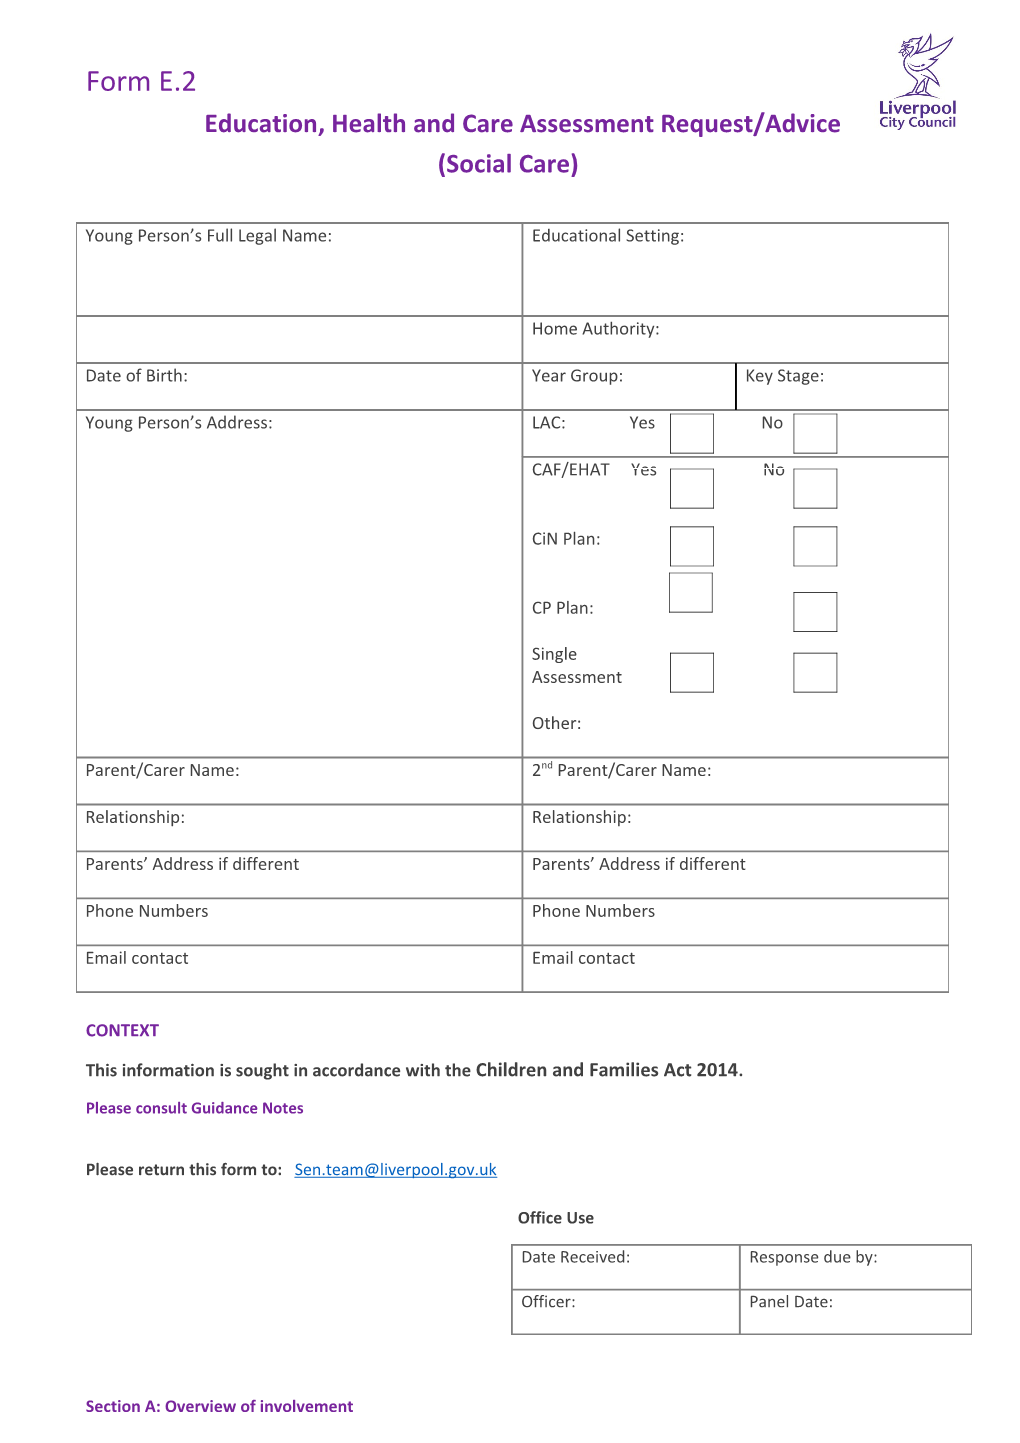 Education, Health and Care Assessment Request/Advice